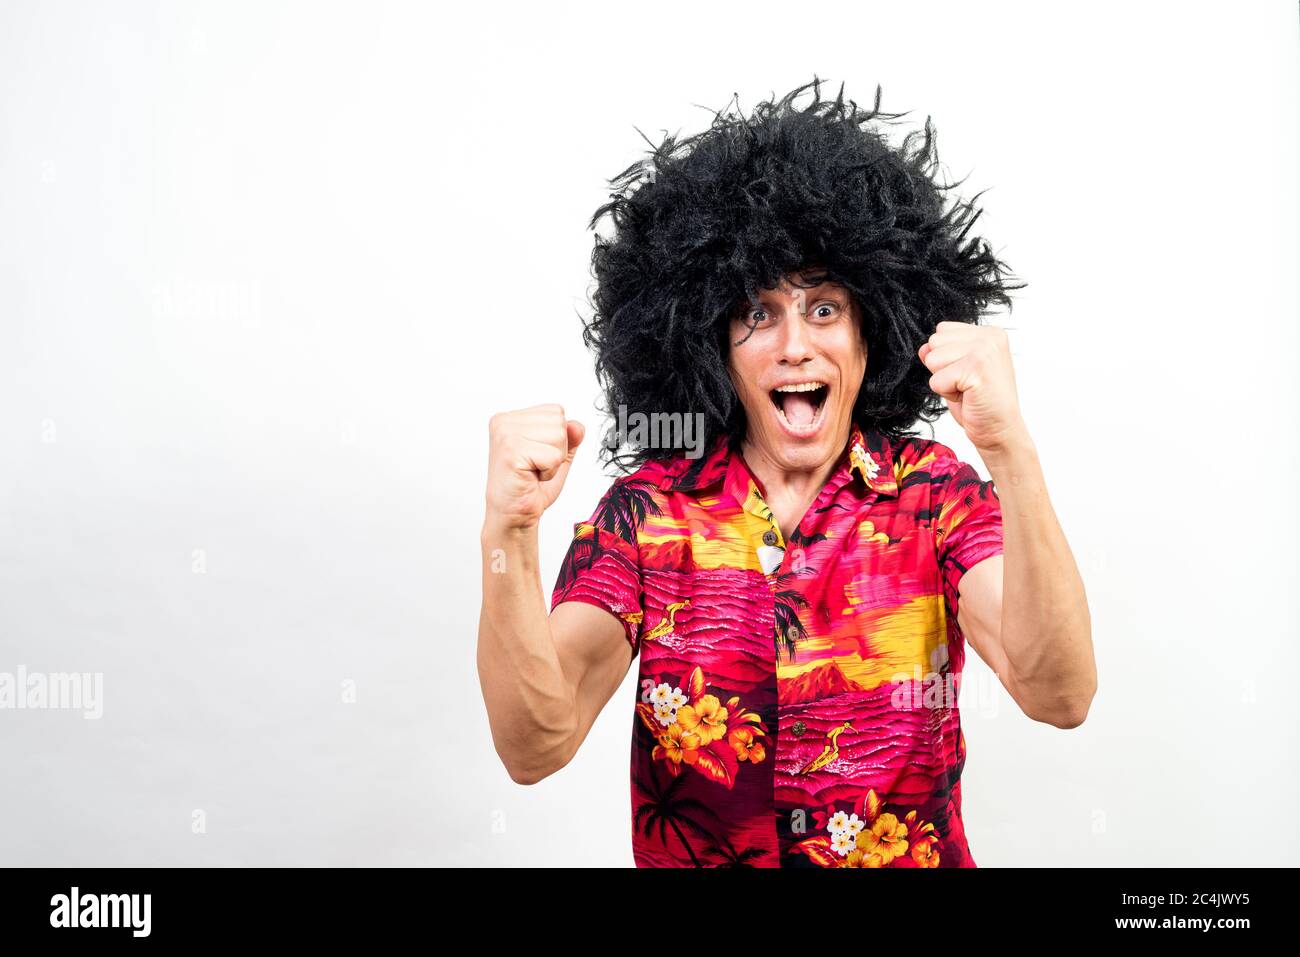 Man with afro wig and hawaiian shirt celebrating something, very happy. Mid shot. White background. Stock Photo